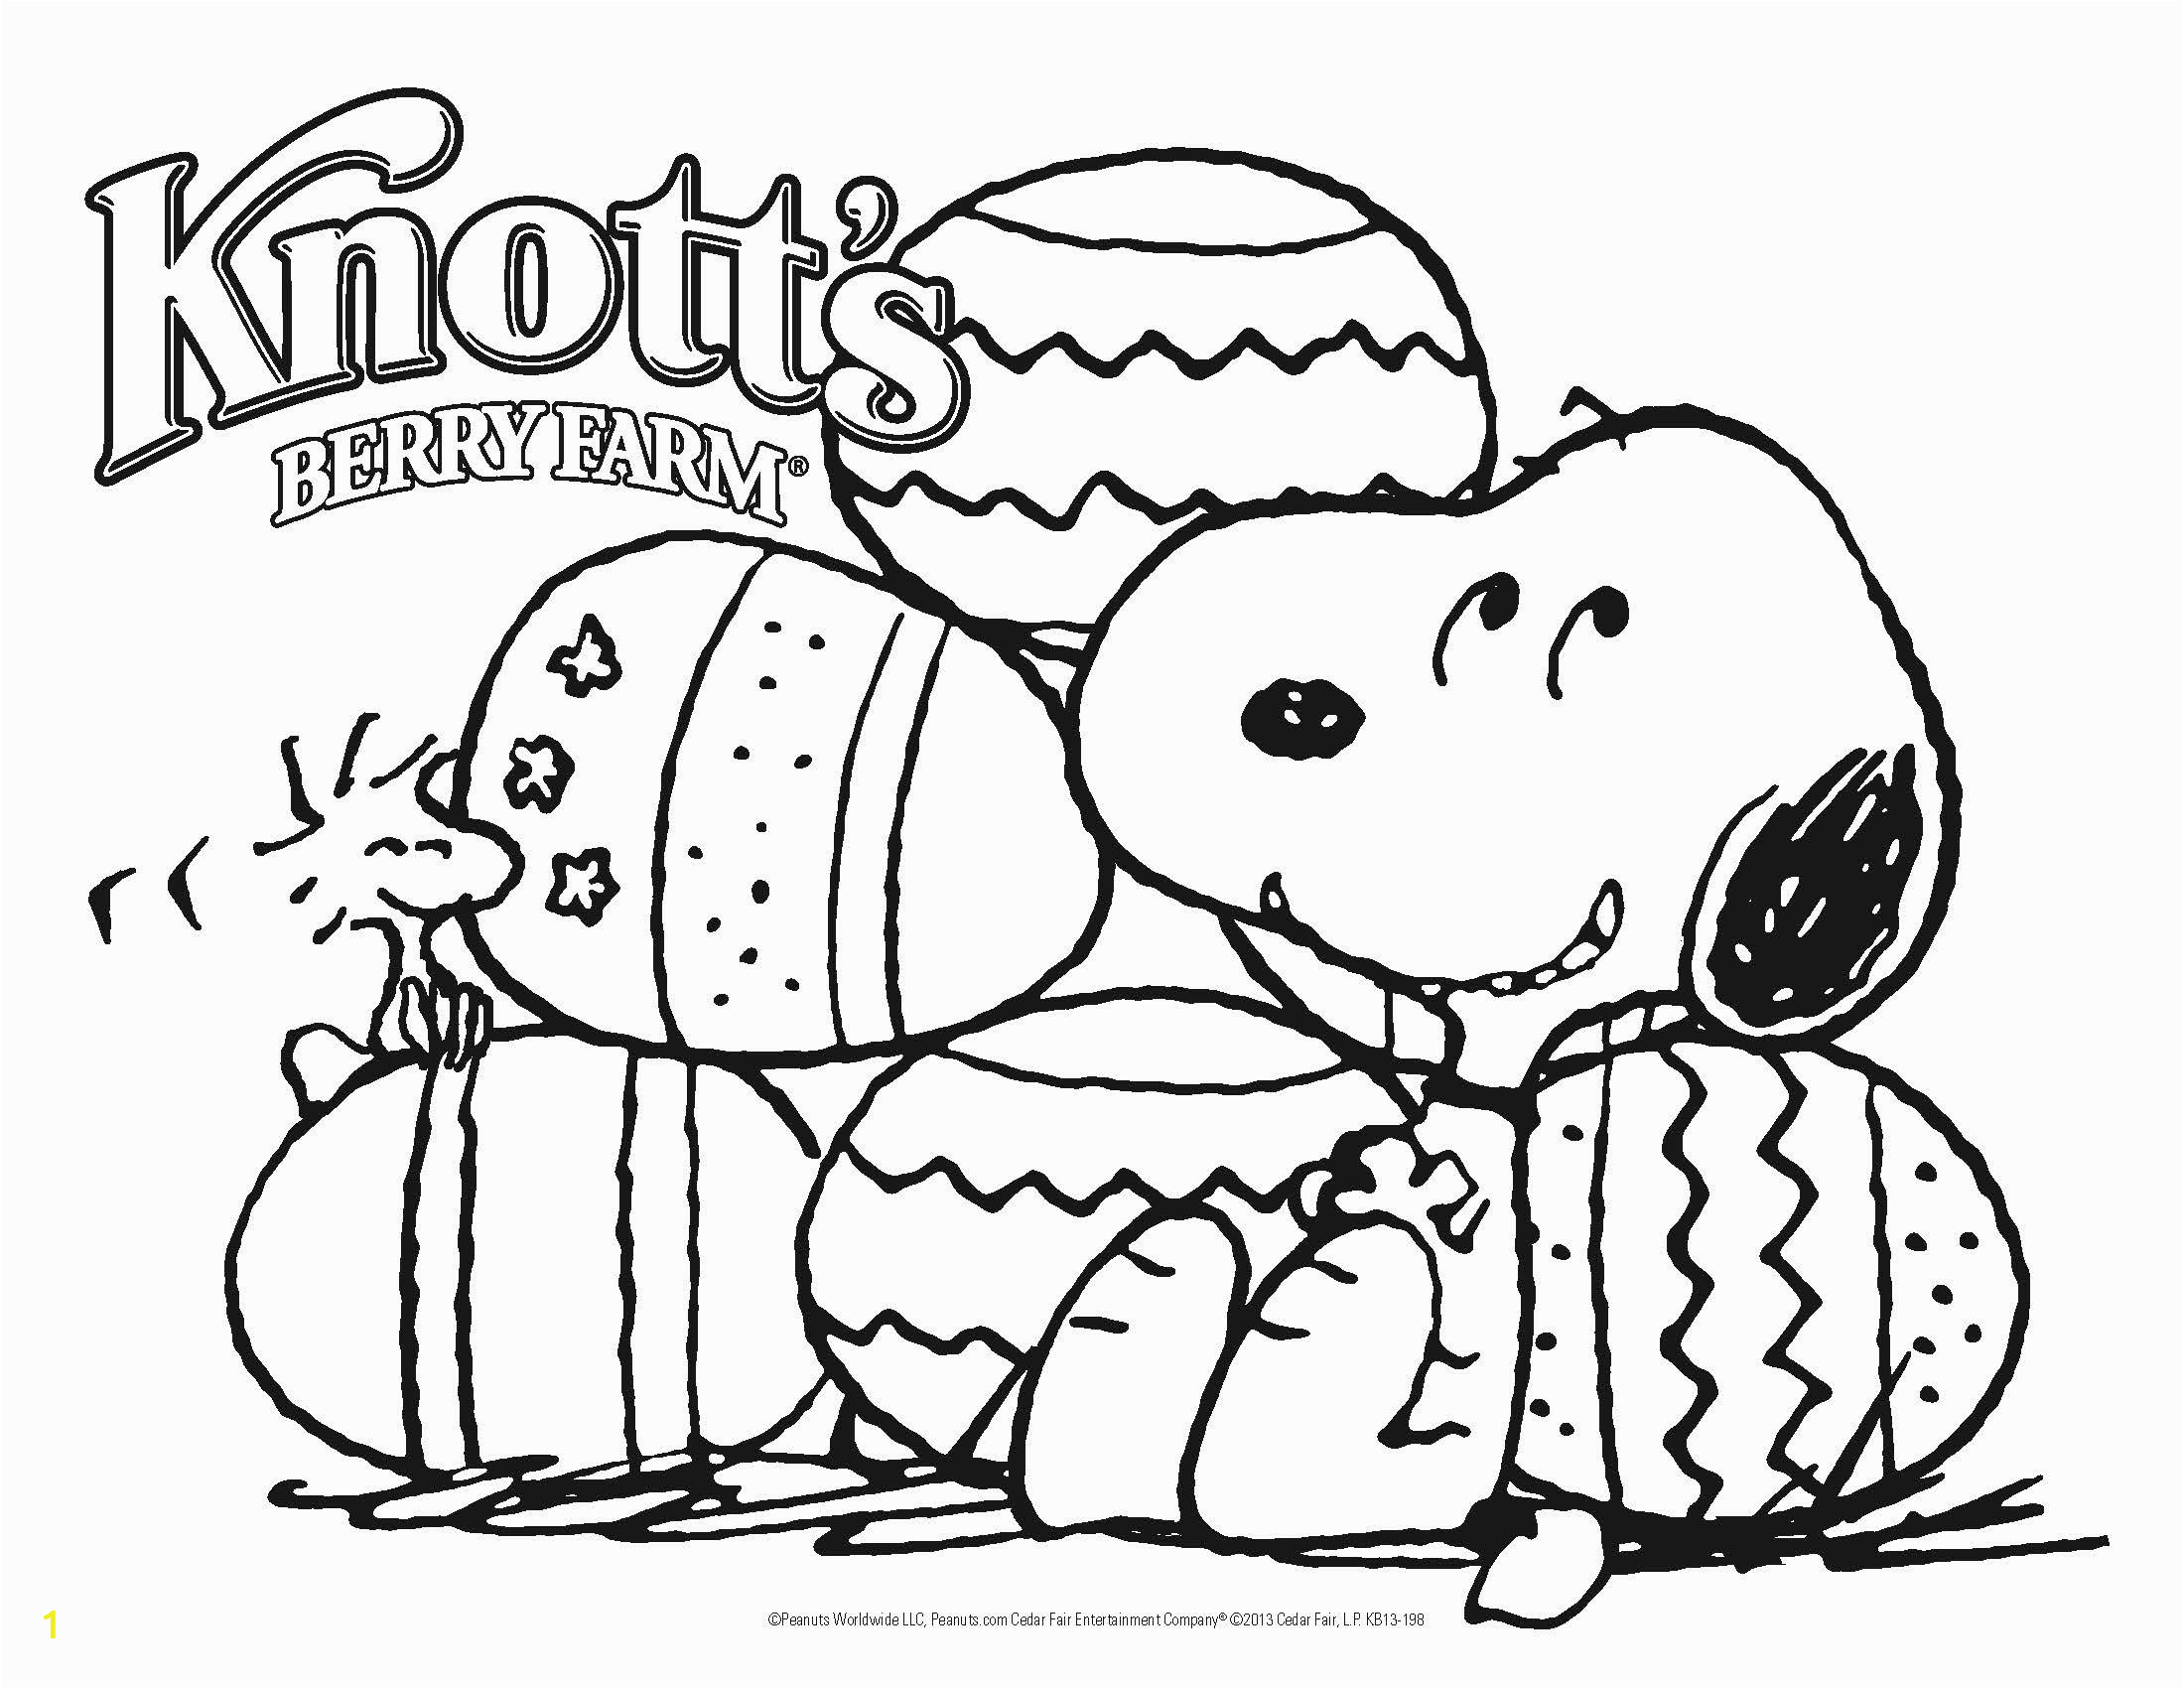 peanuts christmas coloring pages charlie brown at drawings free for gingerbread house pdf baby jesus page grinch sheets angel santa tree colouring picture claus